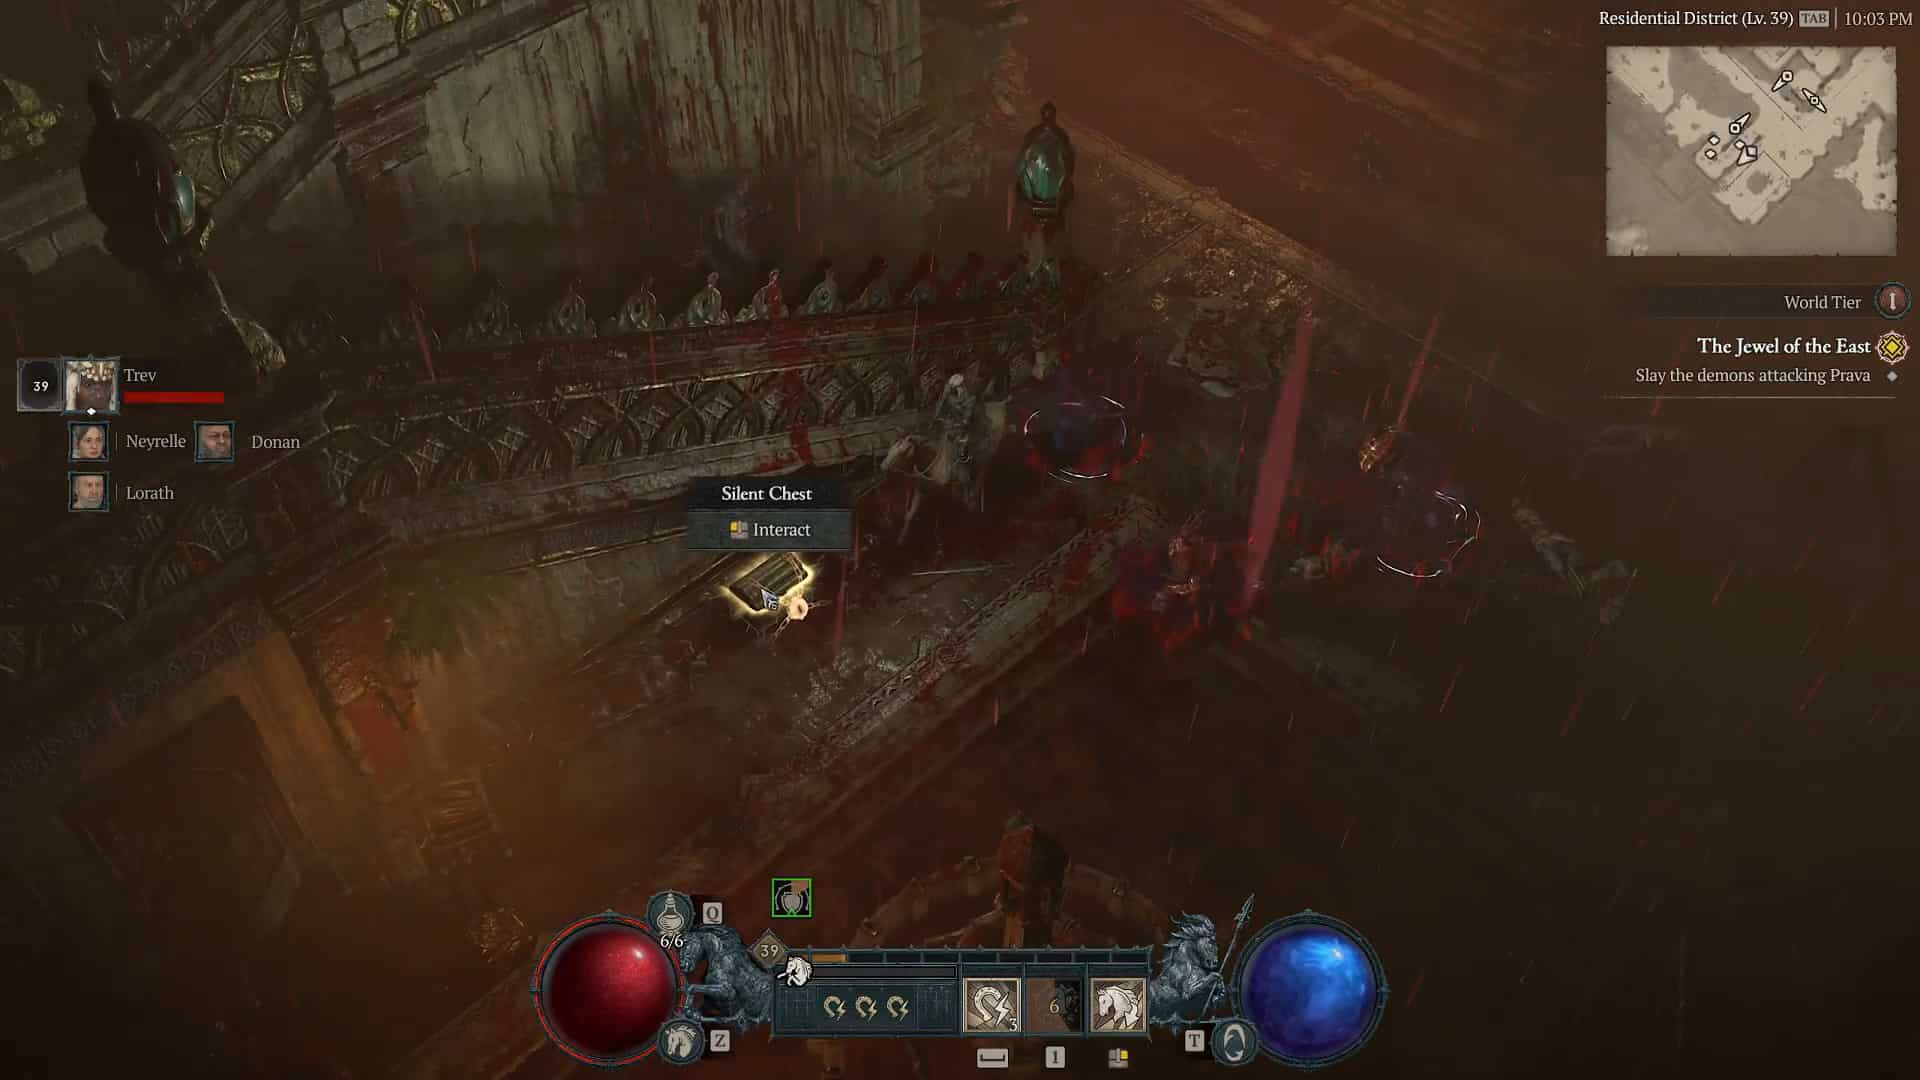 Diablo 4 Silent Chest locations: An image of a player interacting with a Silent Chest.